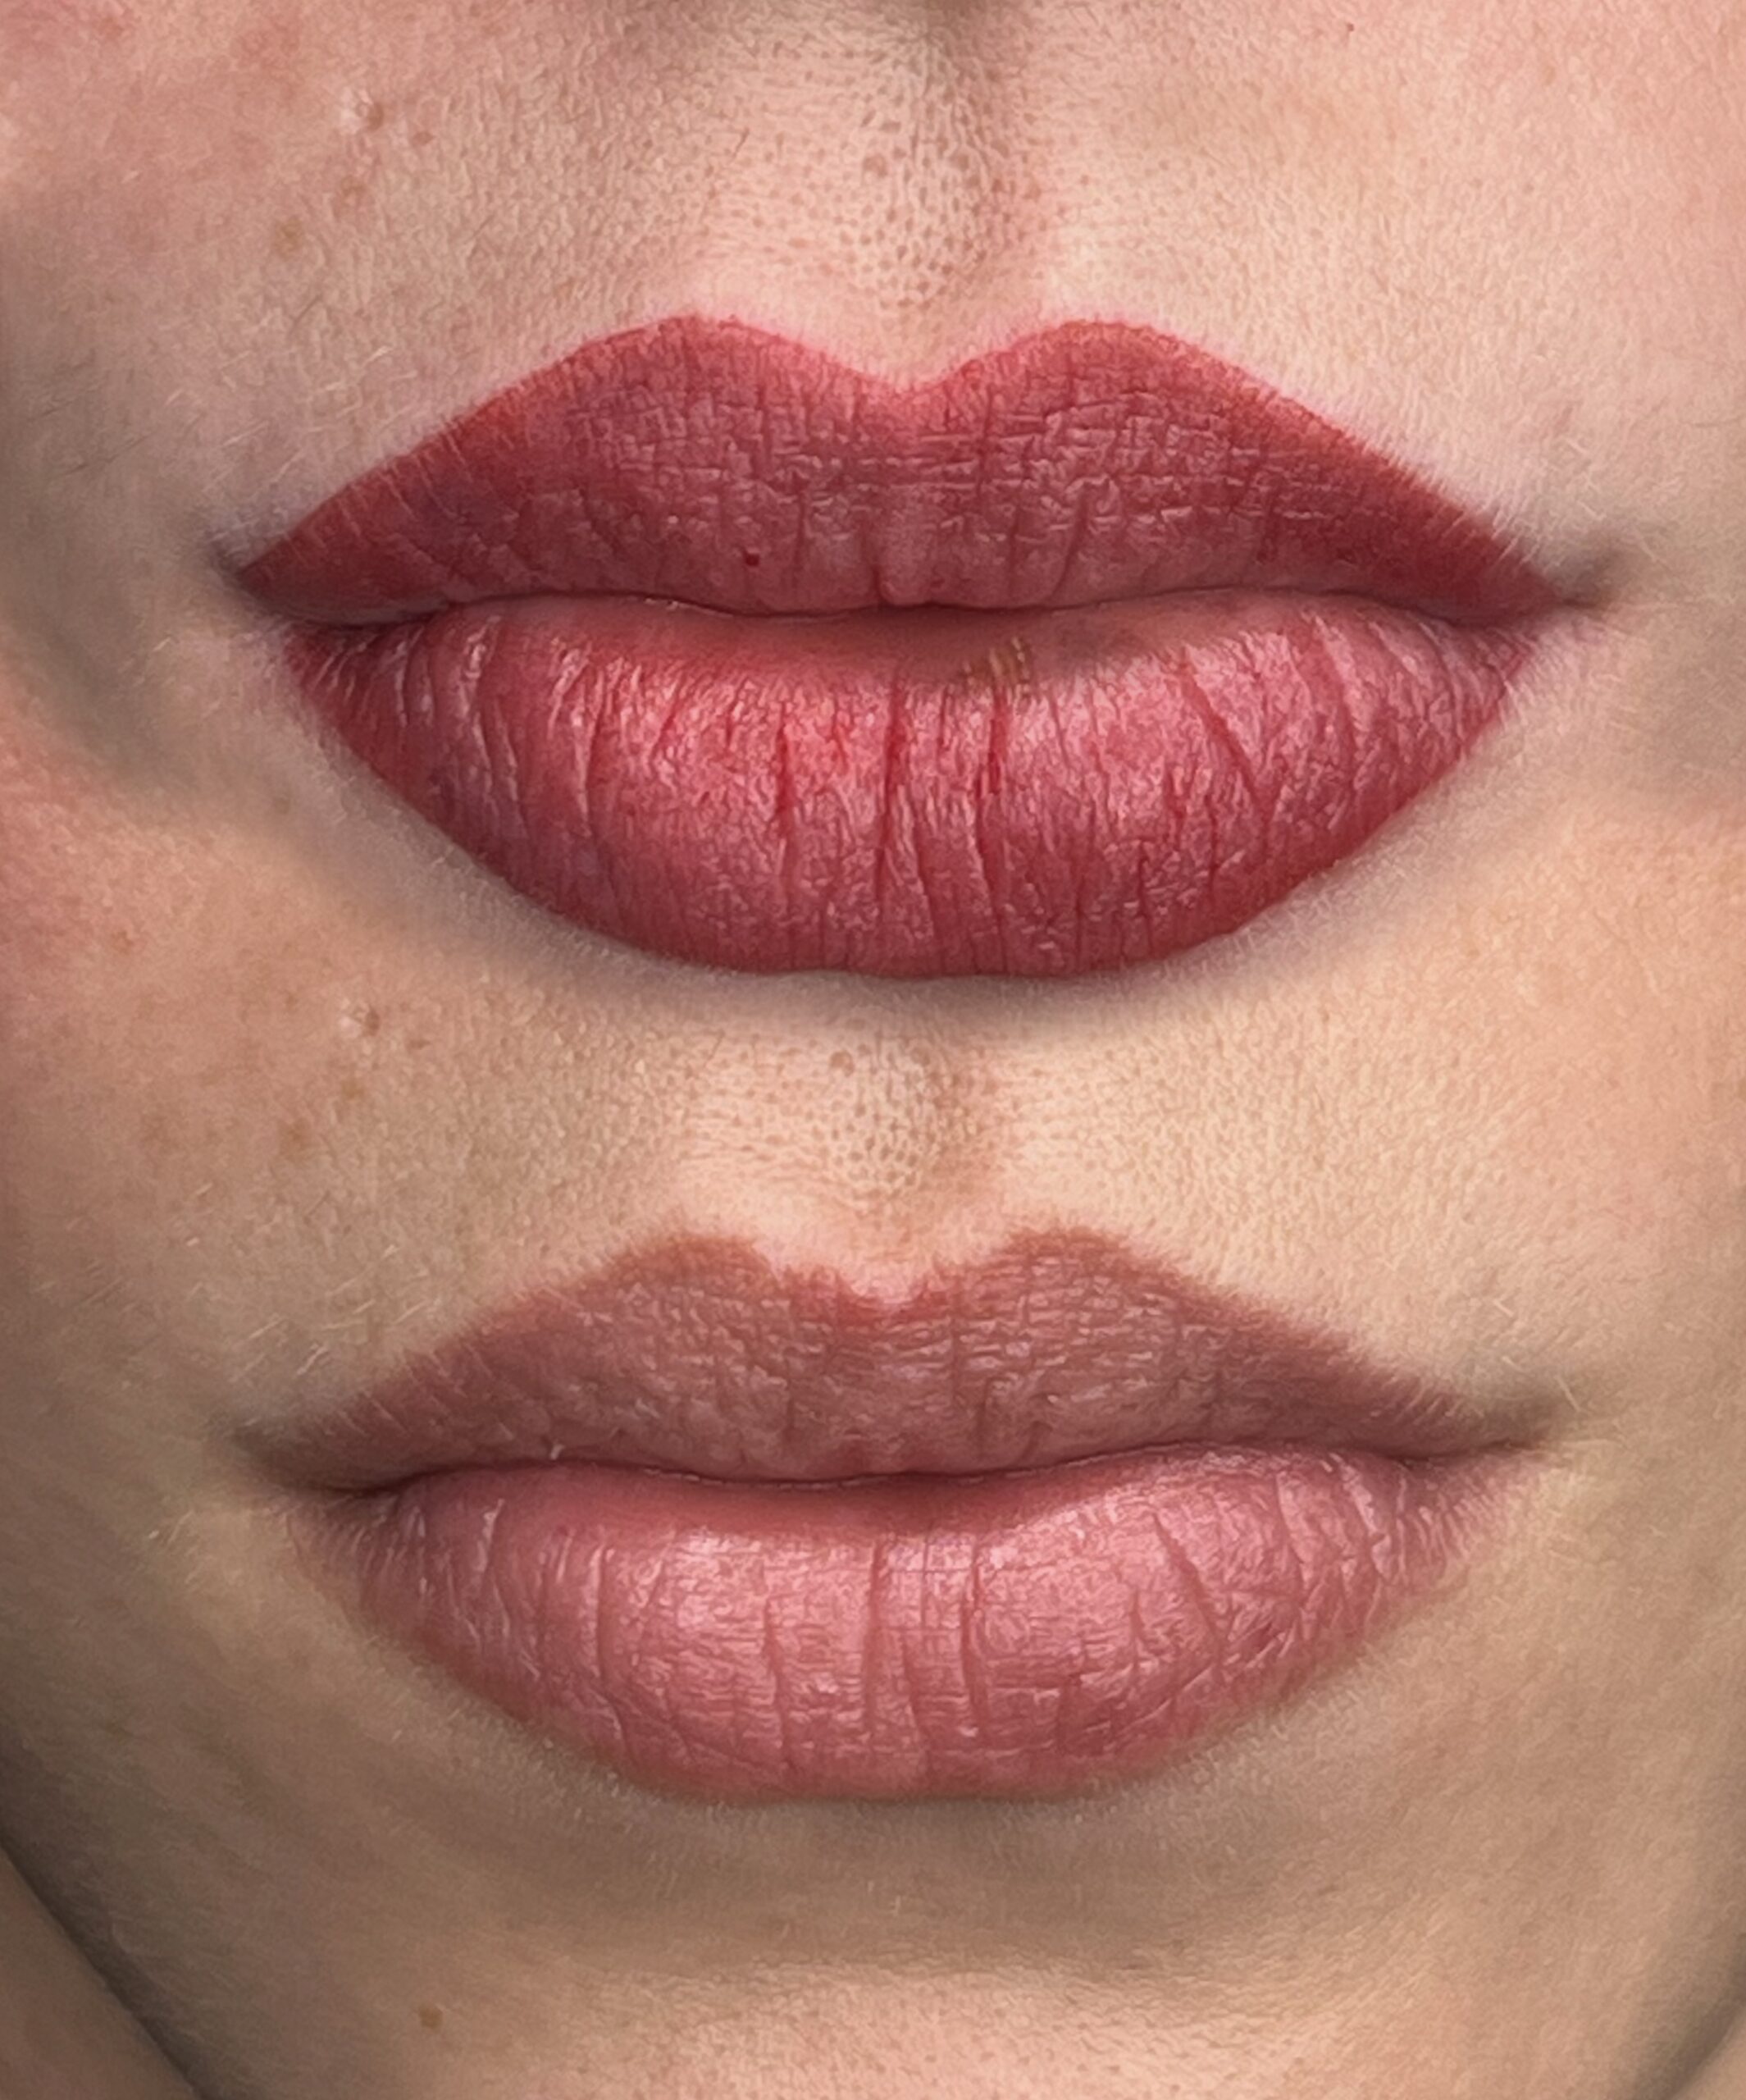 Permanent Makeup Lips Color, Liner - Cupids Bow Tattooed Fuller Lips